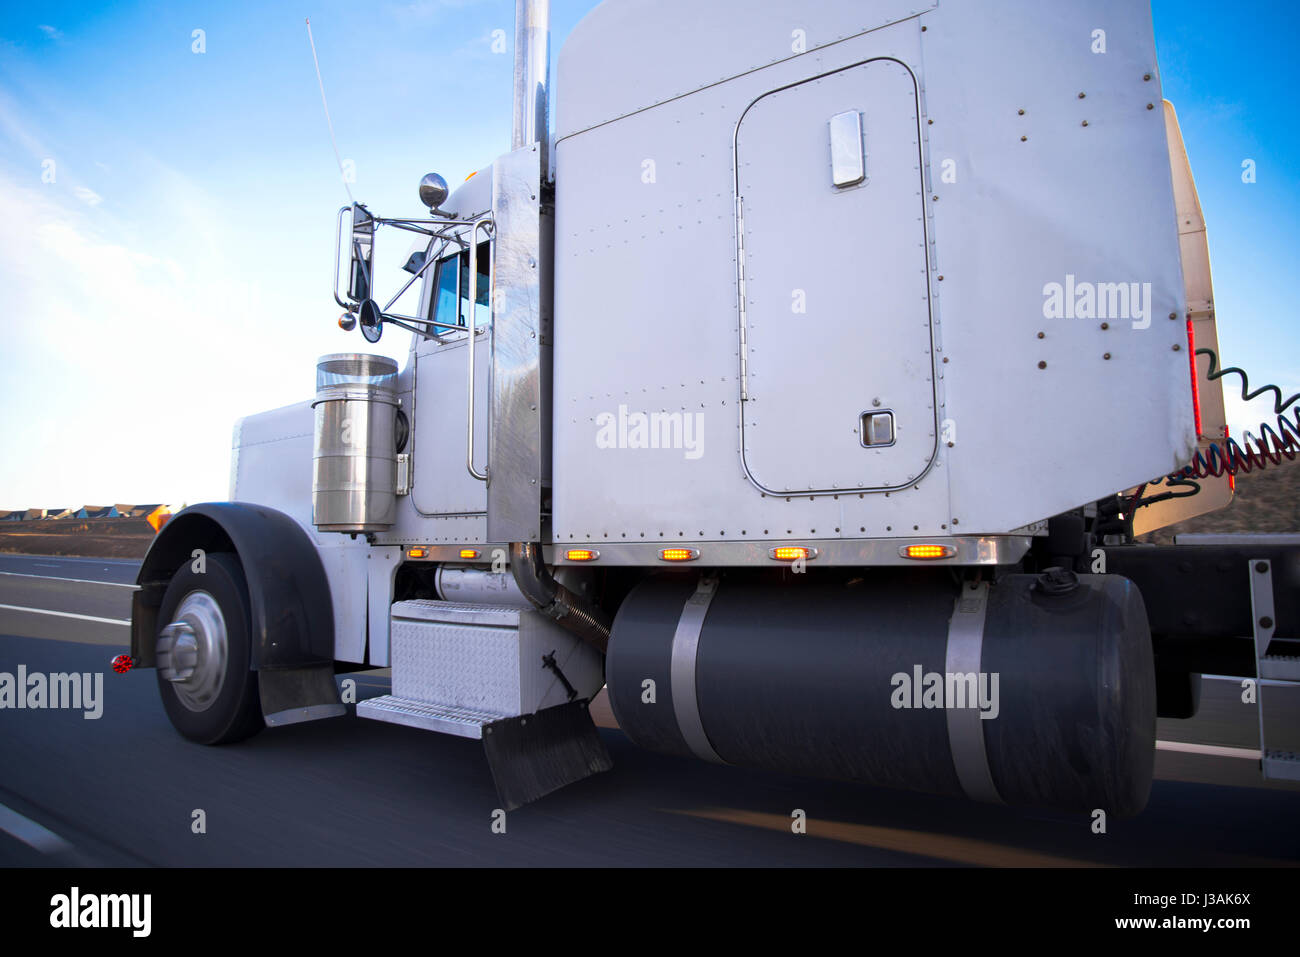 A classic huge, powerful white truck for long distance haulage with a long cab and huge fuel tank is speeding to its destination on the straight road Stock Photo